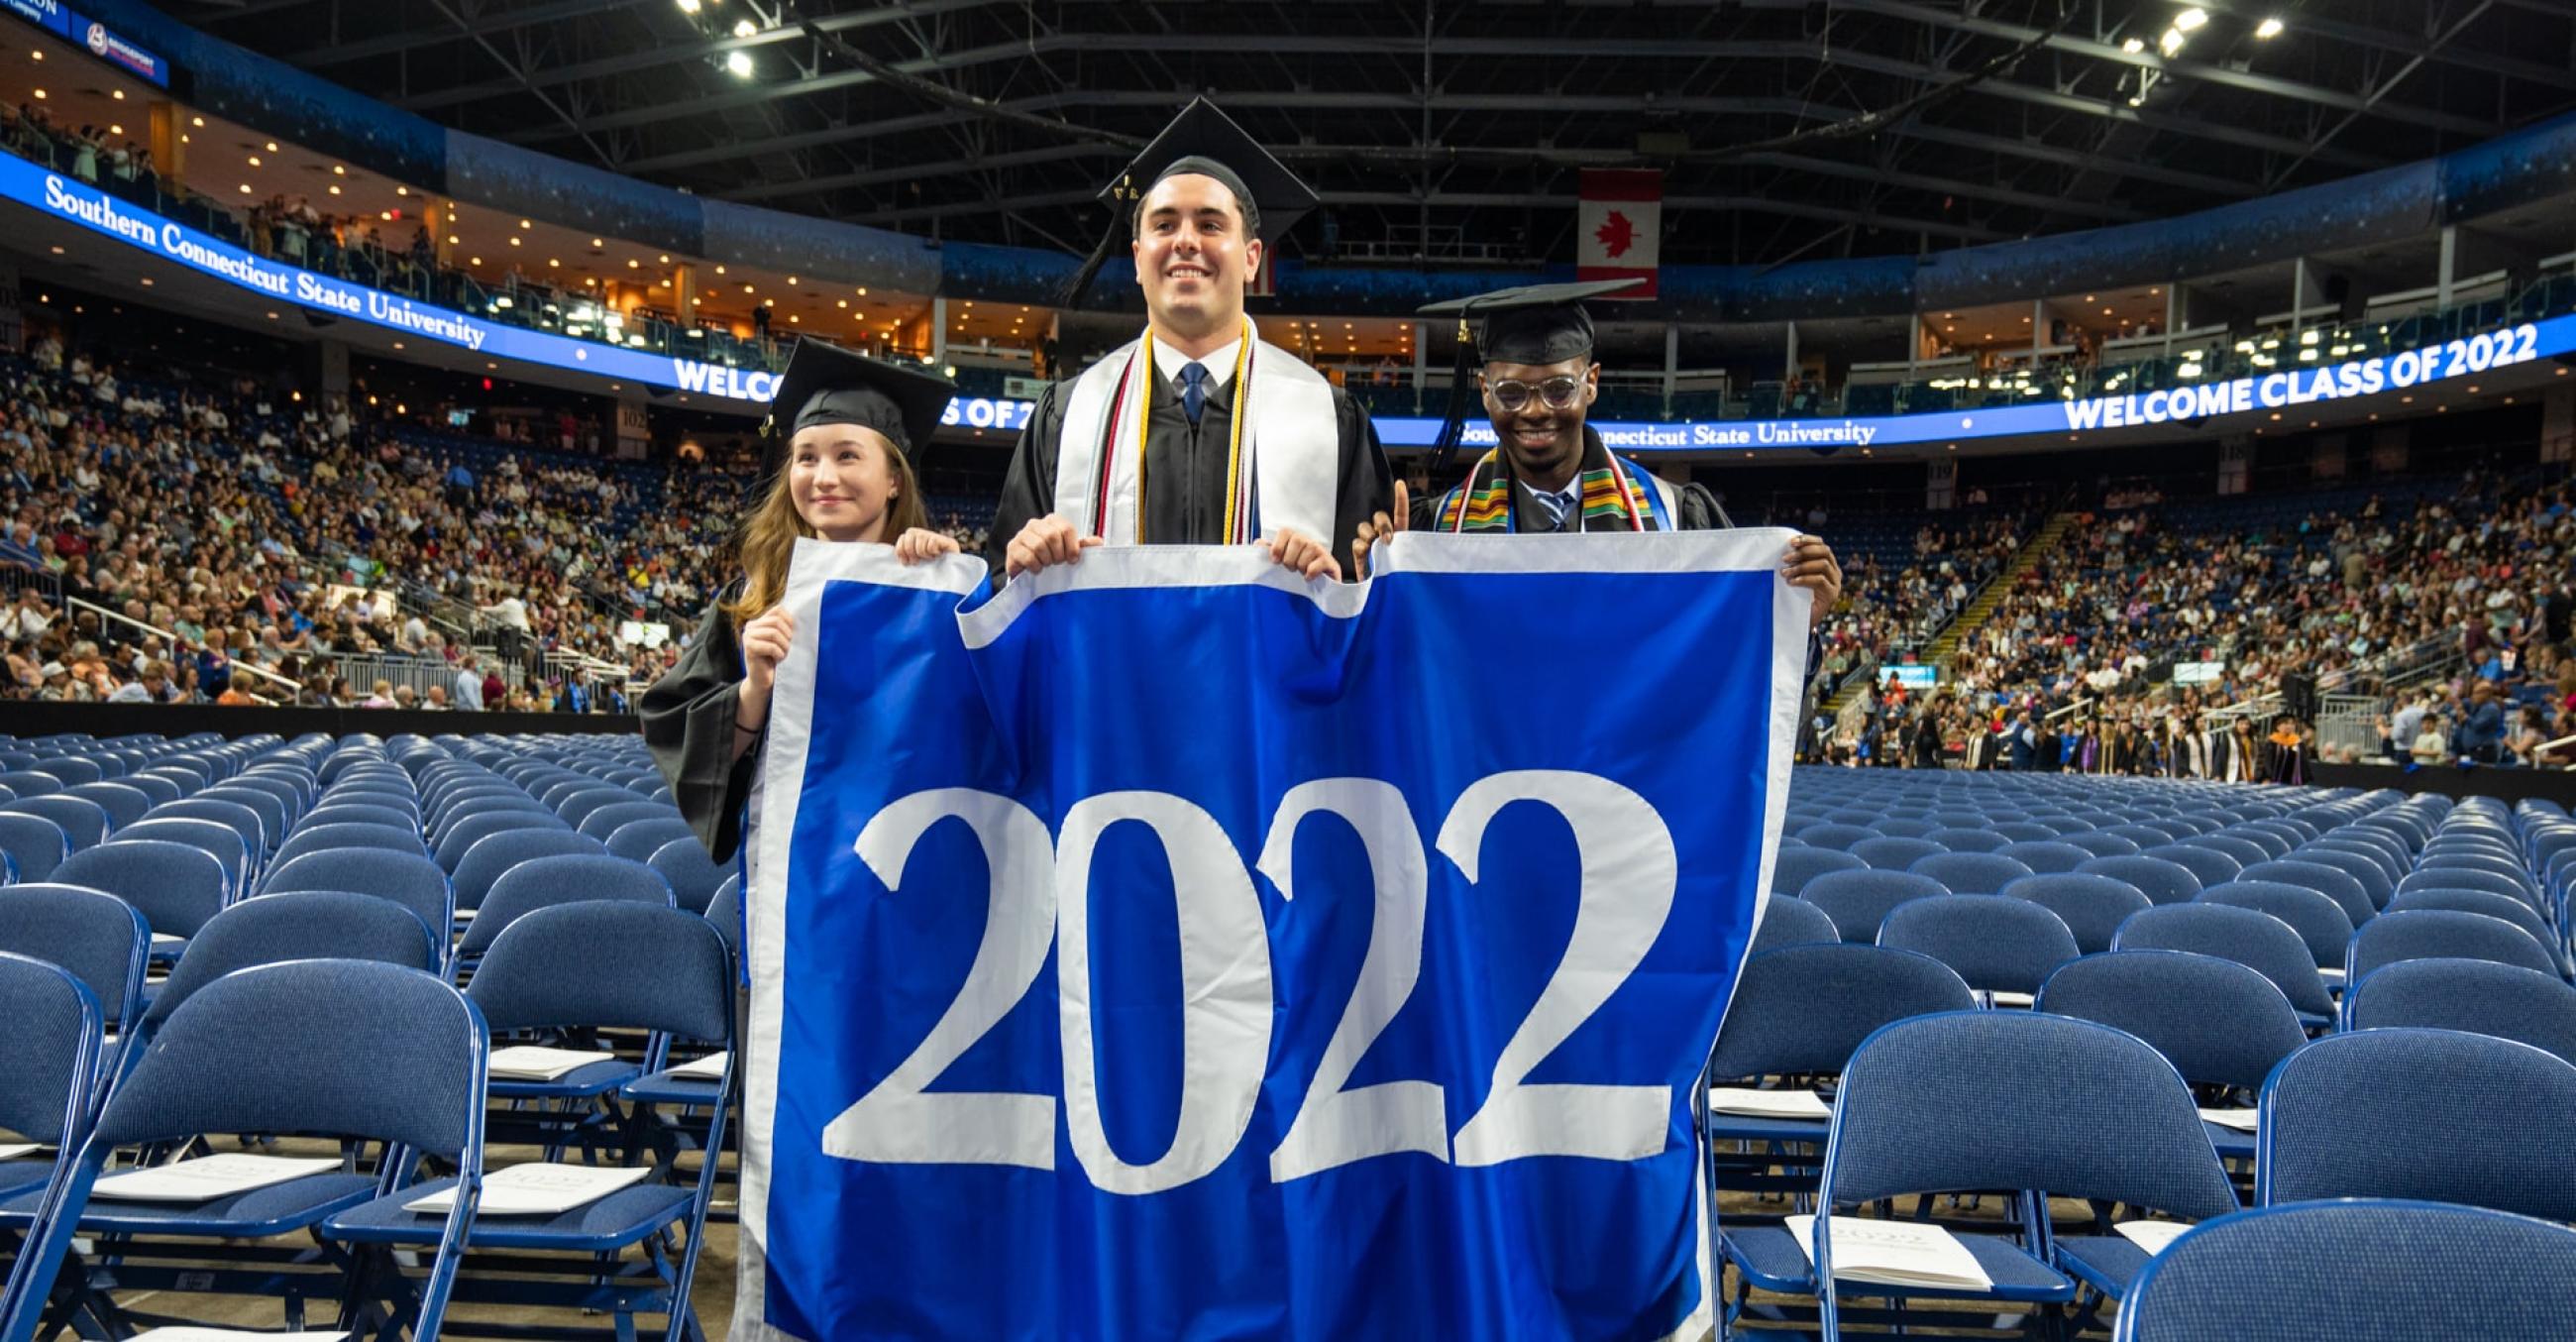 Three graduates holding 2022 sign during commencement